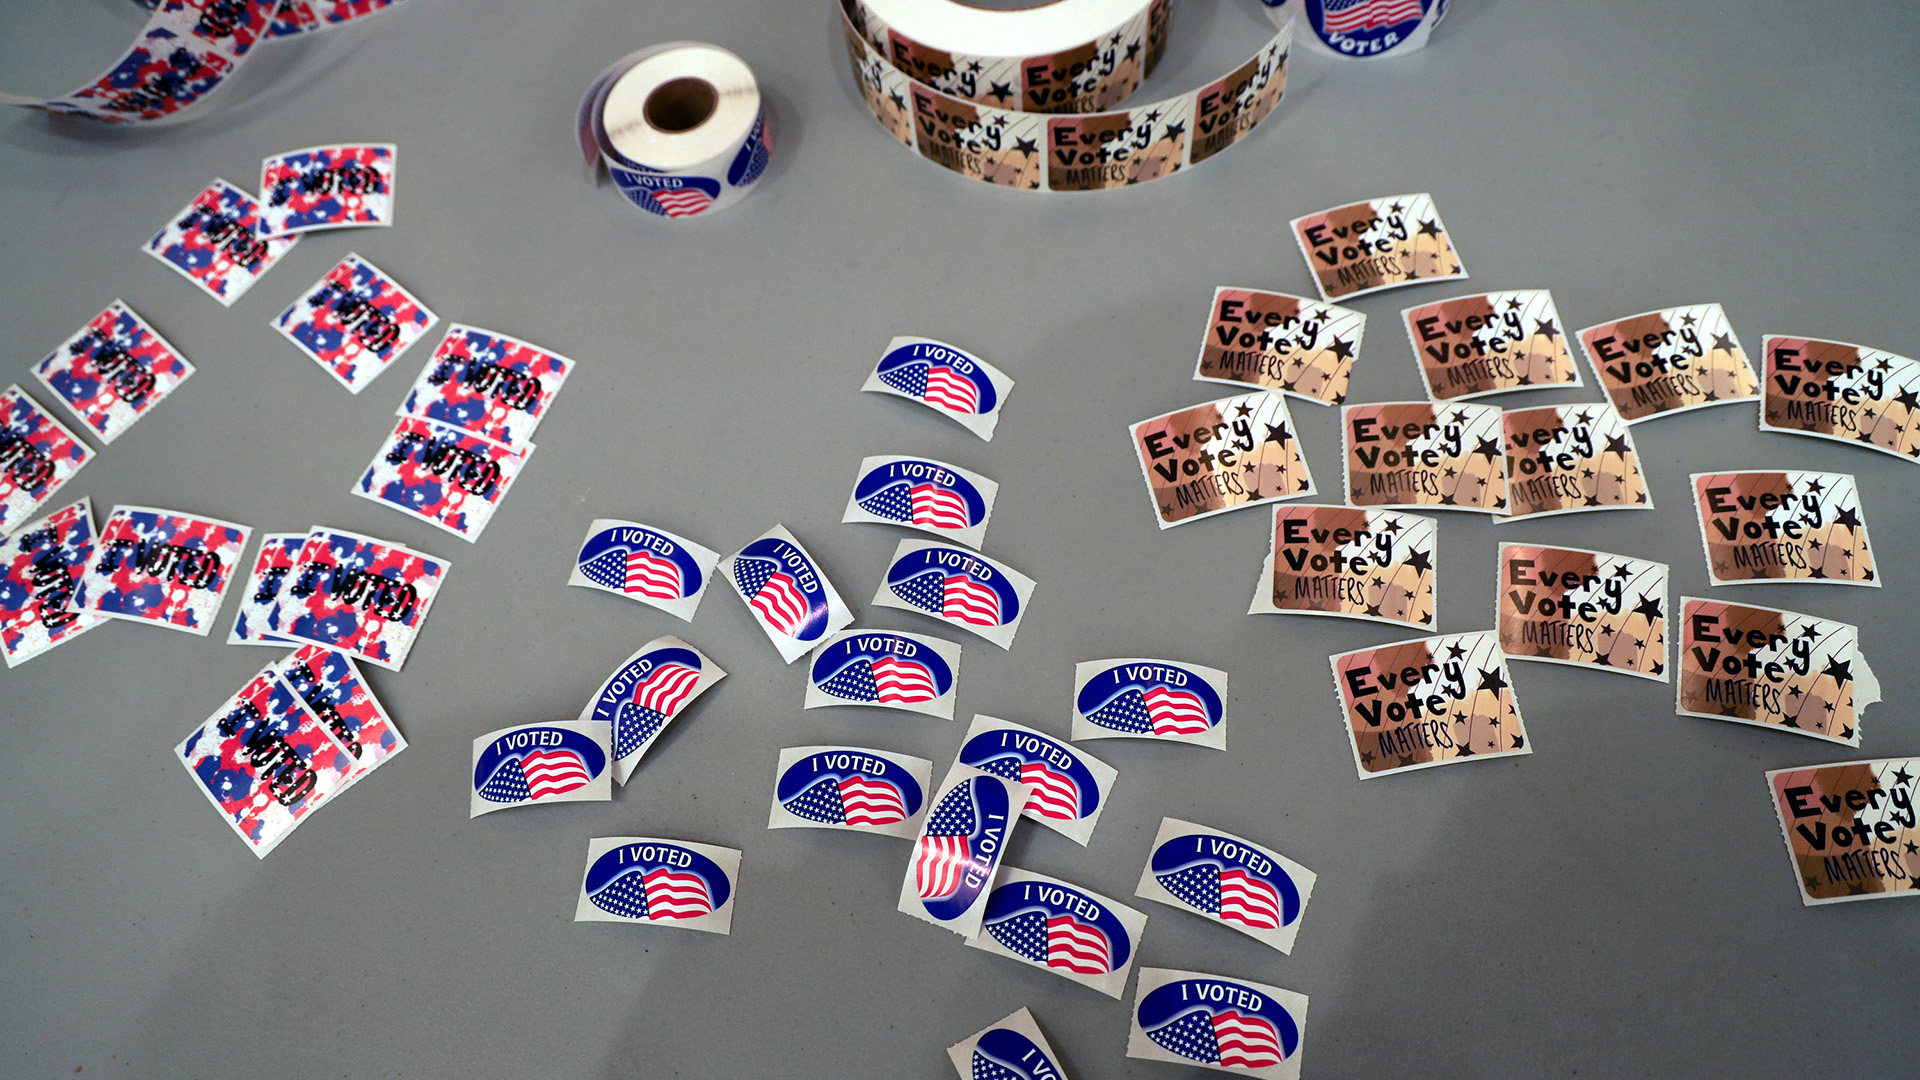 Three types of stickers — one showing a U.S. flag and the U.S. flag, another with an abstract design and the words "Every Vote Counts," and another with an abstract design and the words "Future Voter" — sit individually and in rolls on the surface of a table.